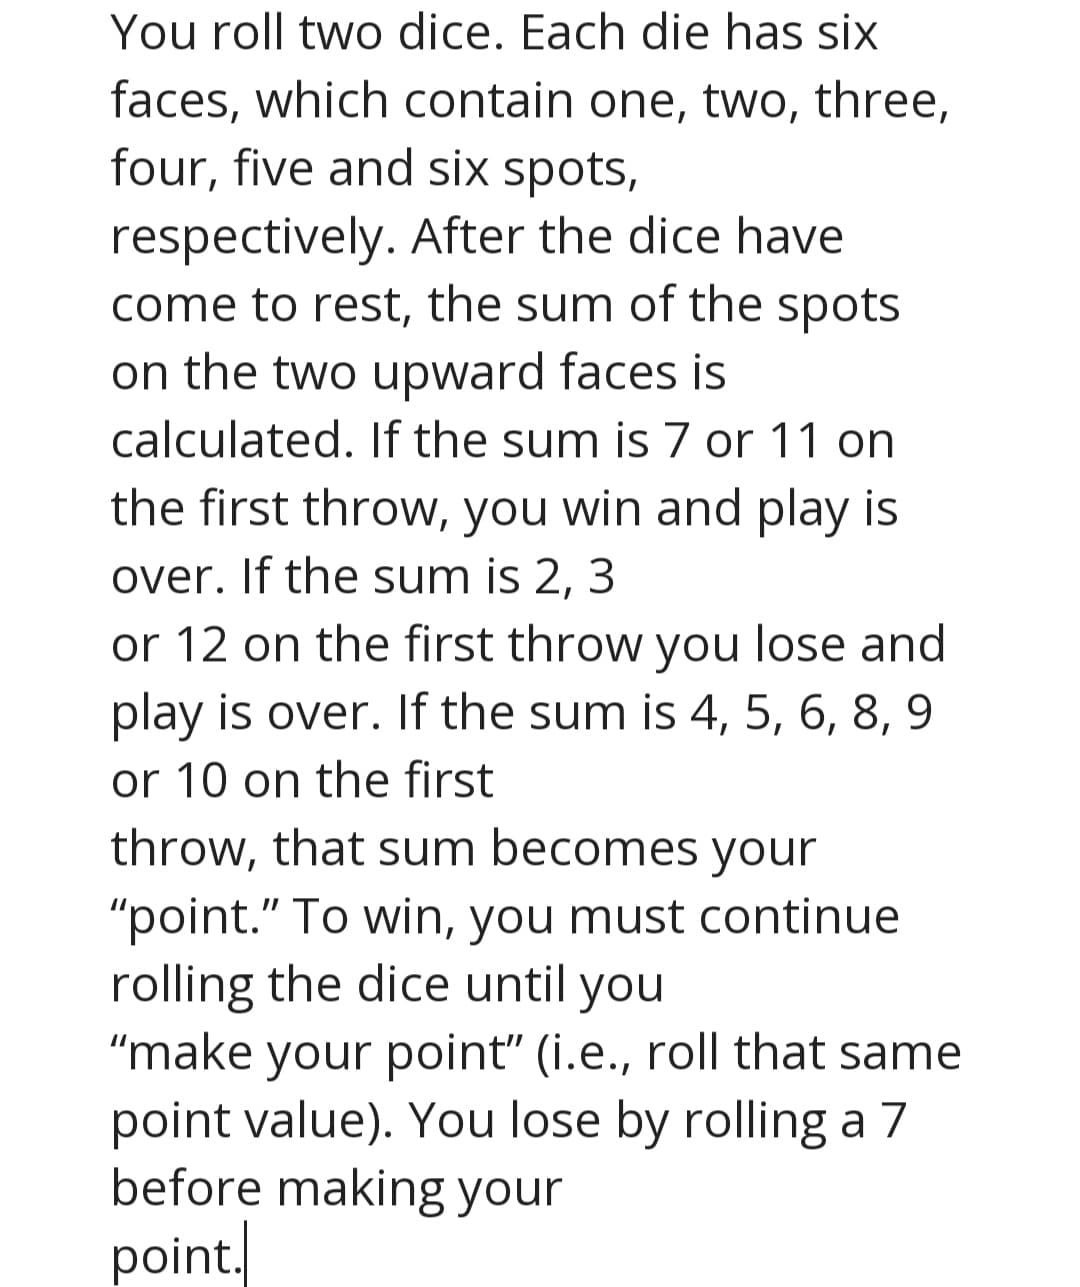 You roll two dice. Each die has six
faces, which contain one, two, three,
four, five and six spots,
respectively. After the dice have
come to rest, the sum of the spots
on the two upward faces is
calculated. If the sum is 7 or 11 on
the first throw, you win and play is
over. If the sum is 2,
3
or 12 on the first throw you lose and
play is over. If the sum is 4, 5, 6, 8, 9
or 10 on the first
throw, that sum becomes your
"point." To win, you must continue
rolling the dice until you
"make your point" (i.e., roll that same
point value). You lose by rolling a 7
before making your
point.
